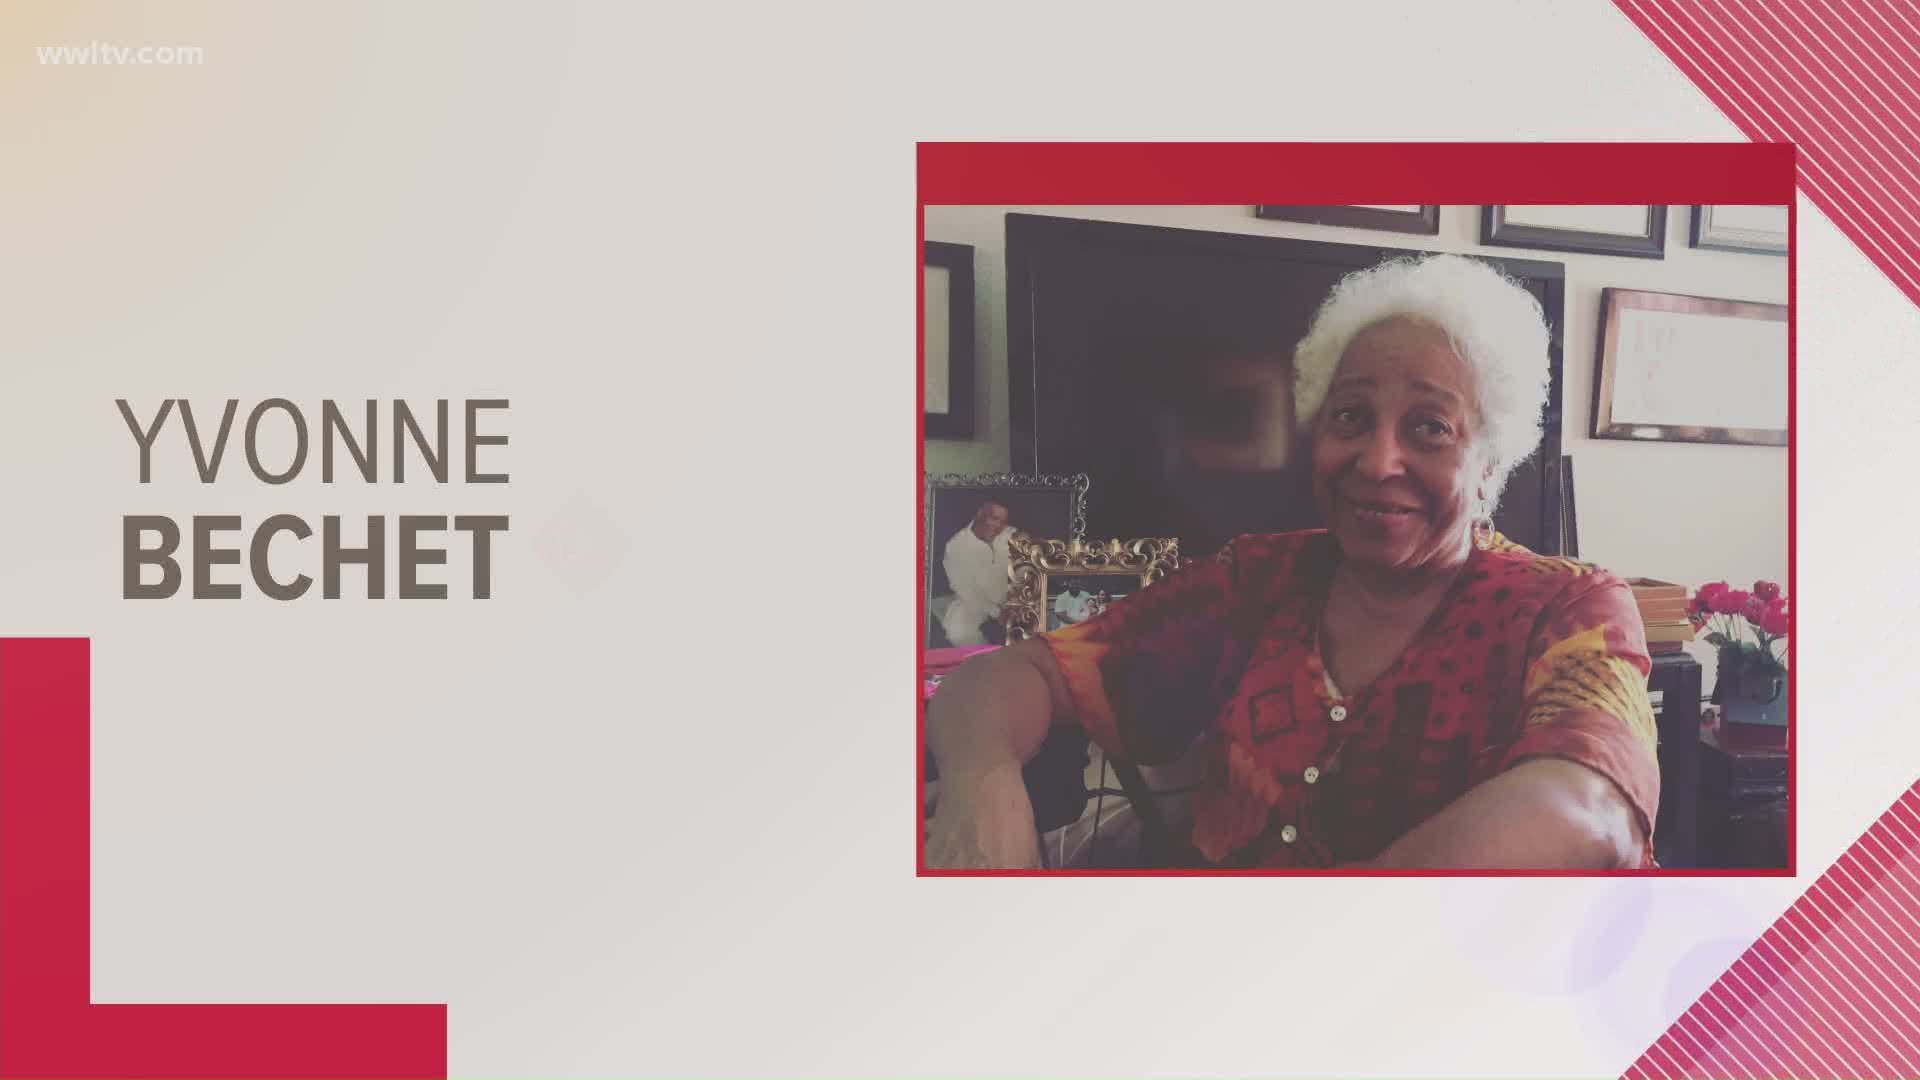 "Heaven has gained an angel today," tweeted the NOPD account of Yvonne Bechet.